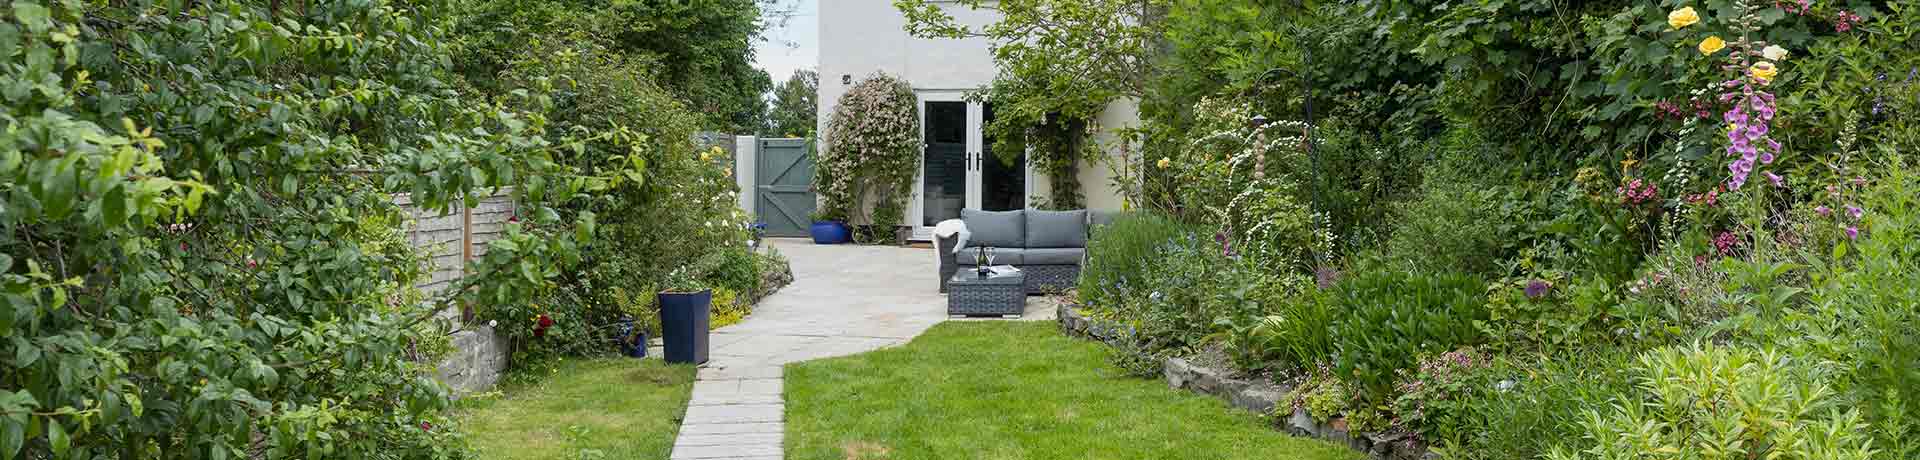 Dog friendly cottages in Wiltshire with an enclosed garden.